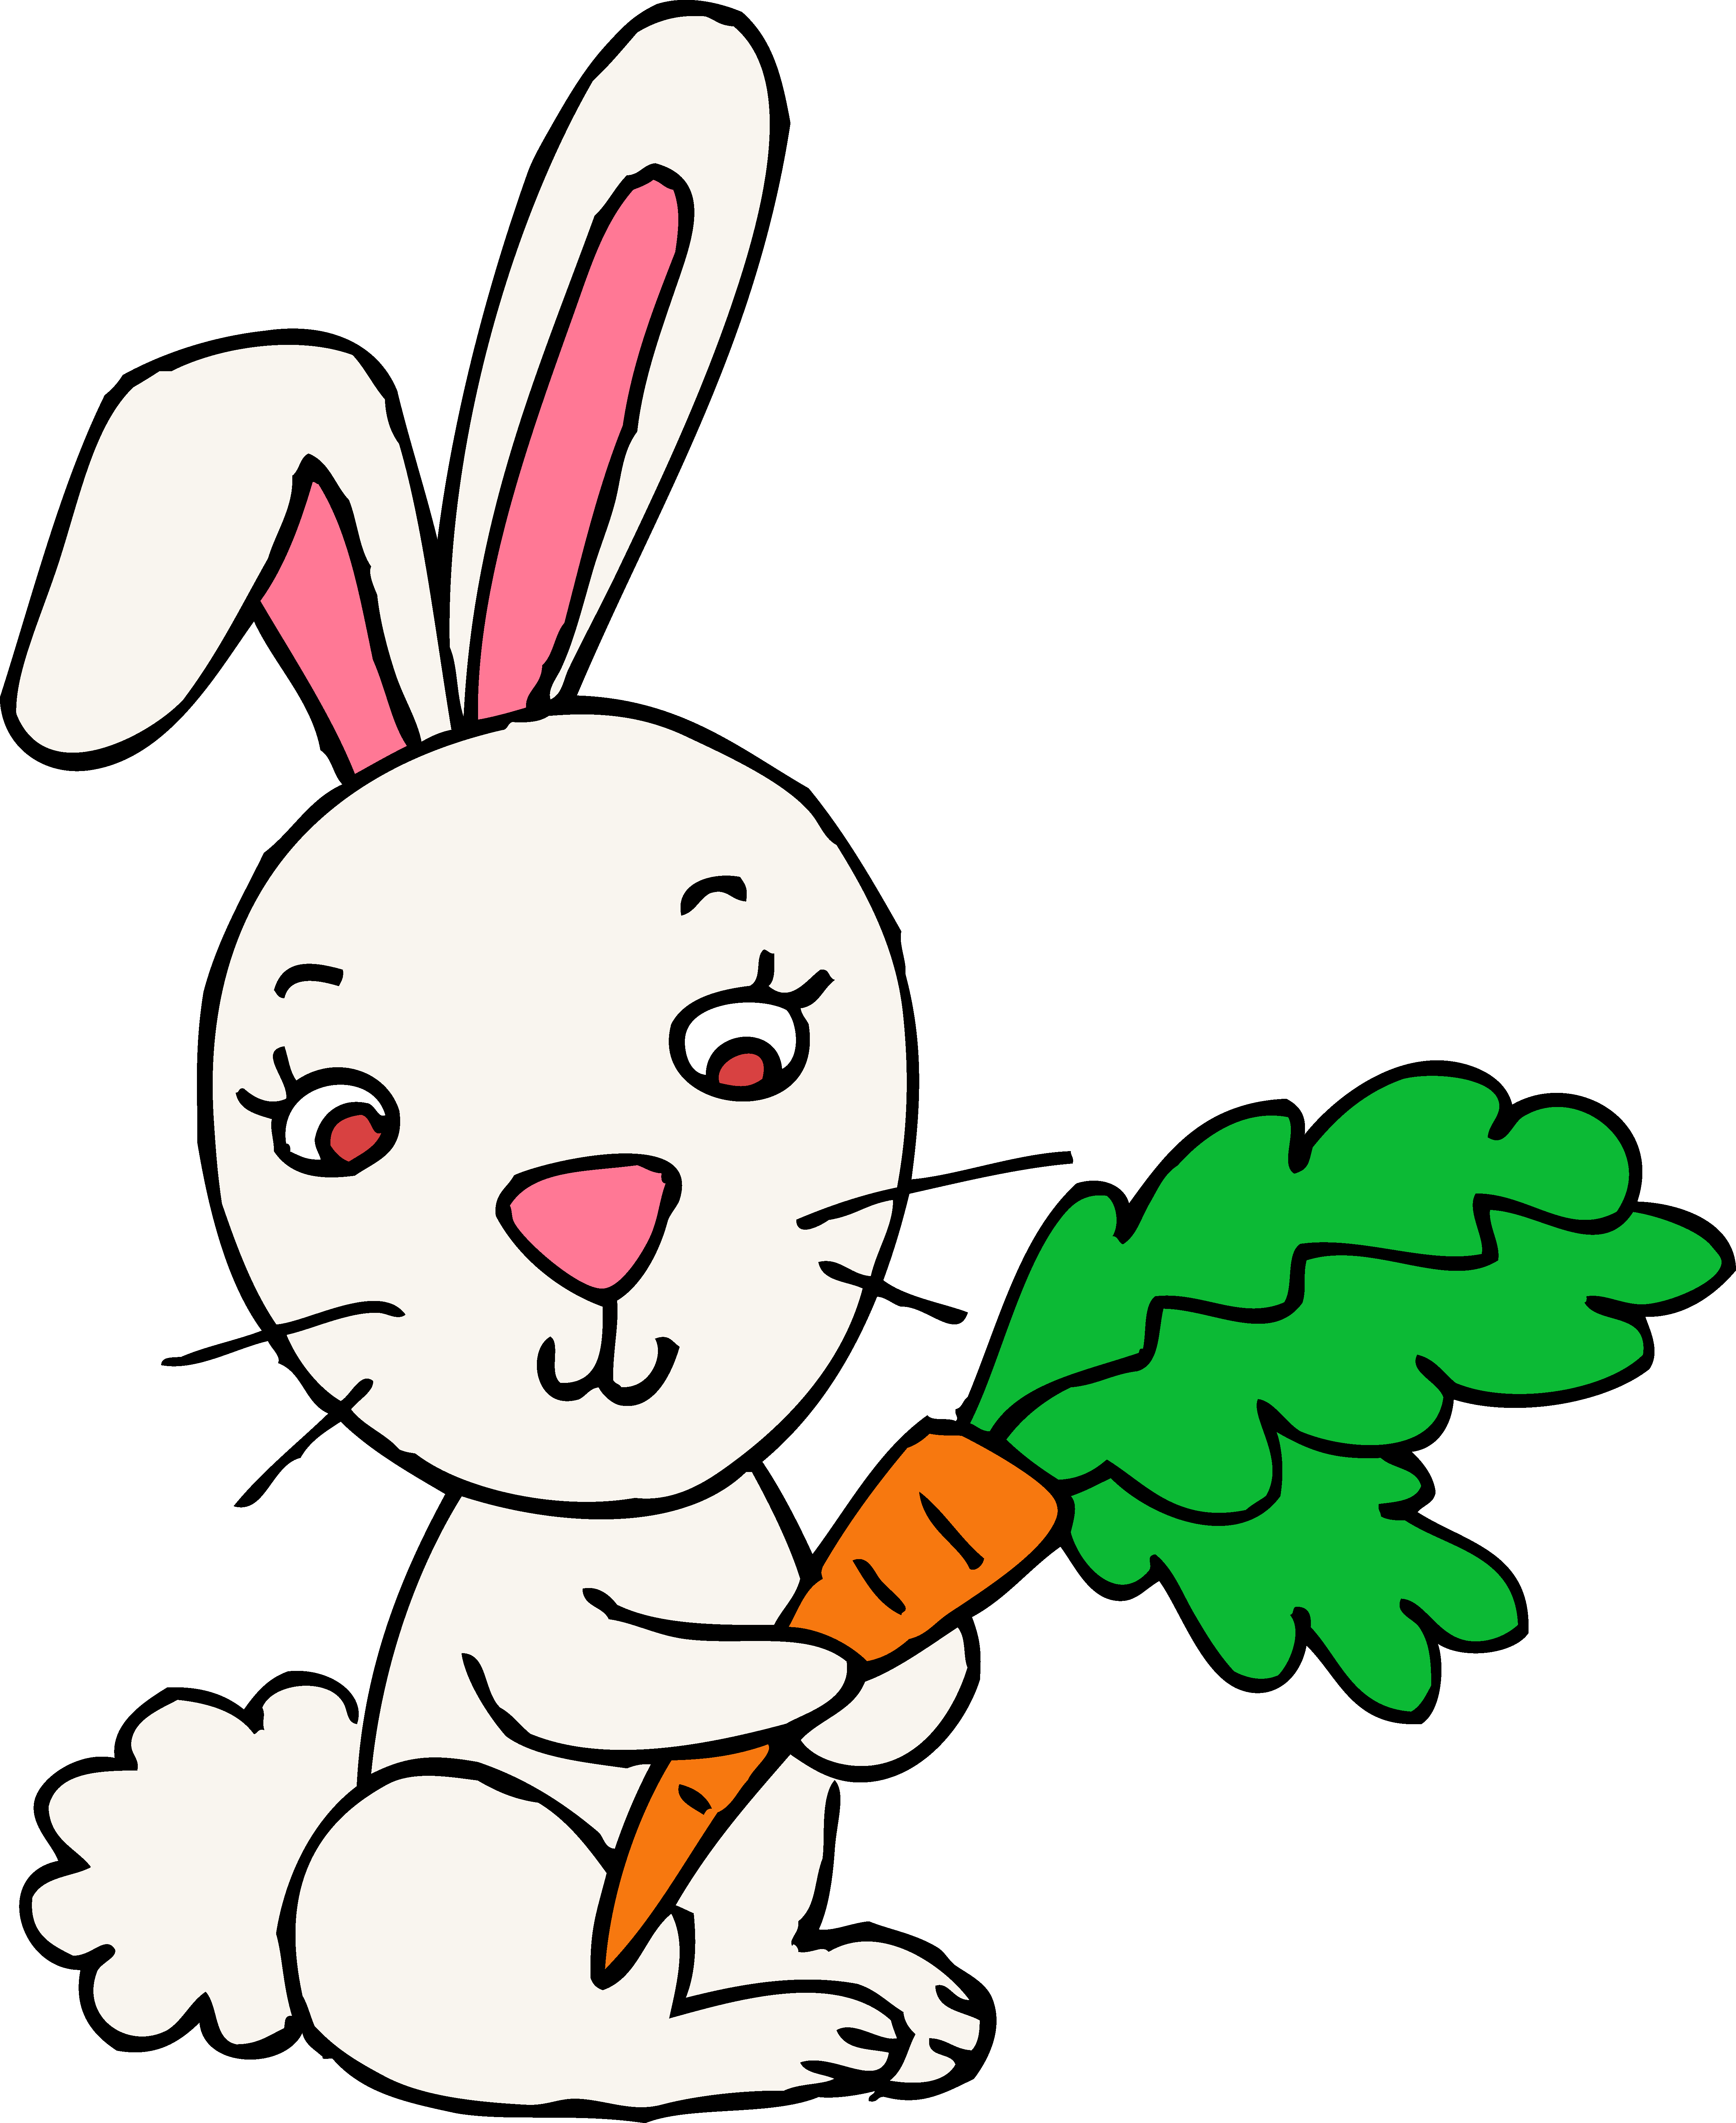 Clipart free easter bunny. Rabbit 